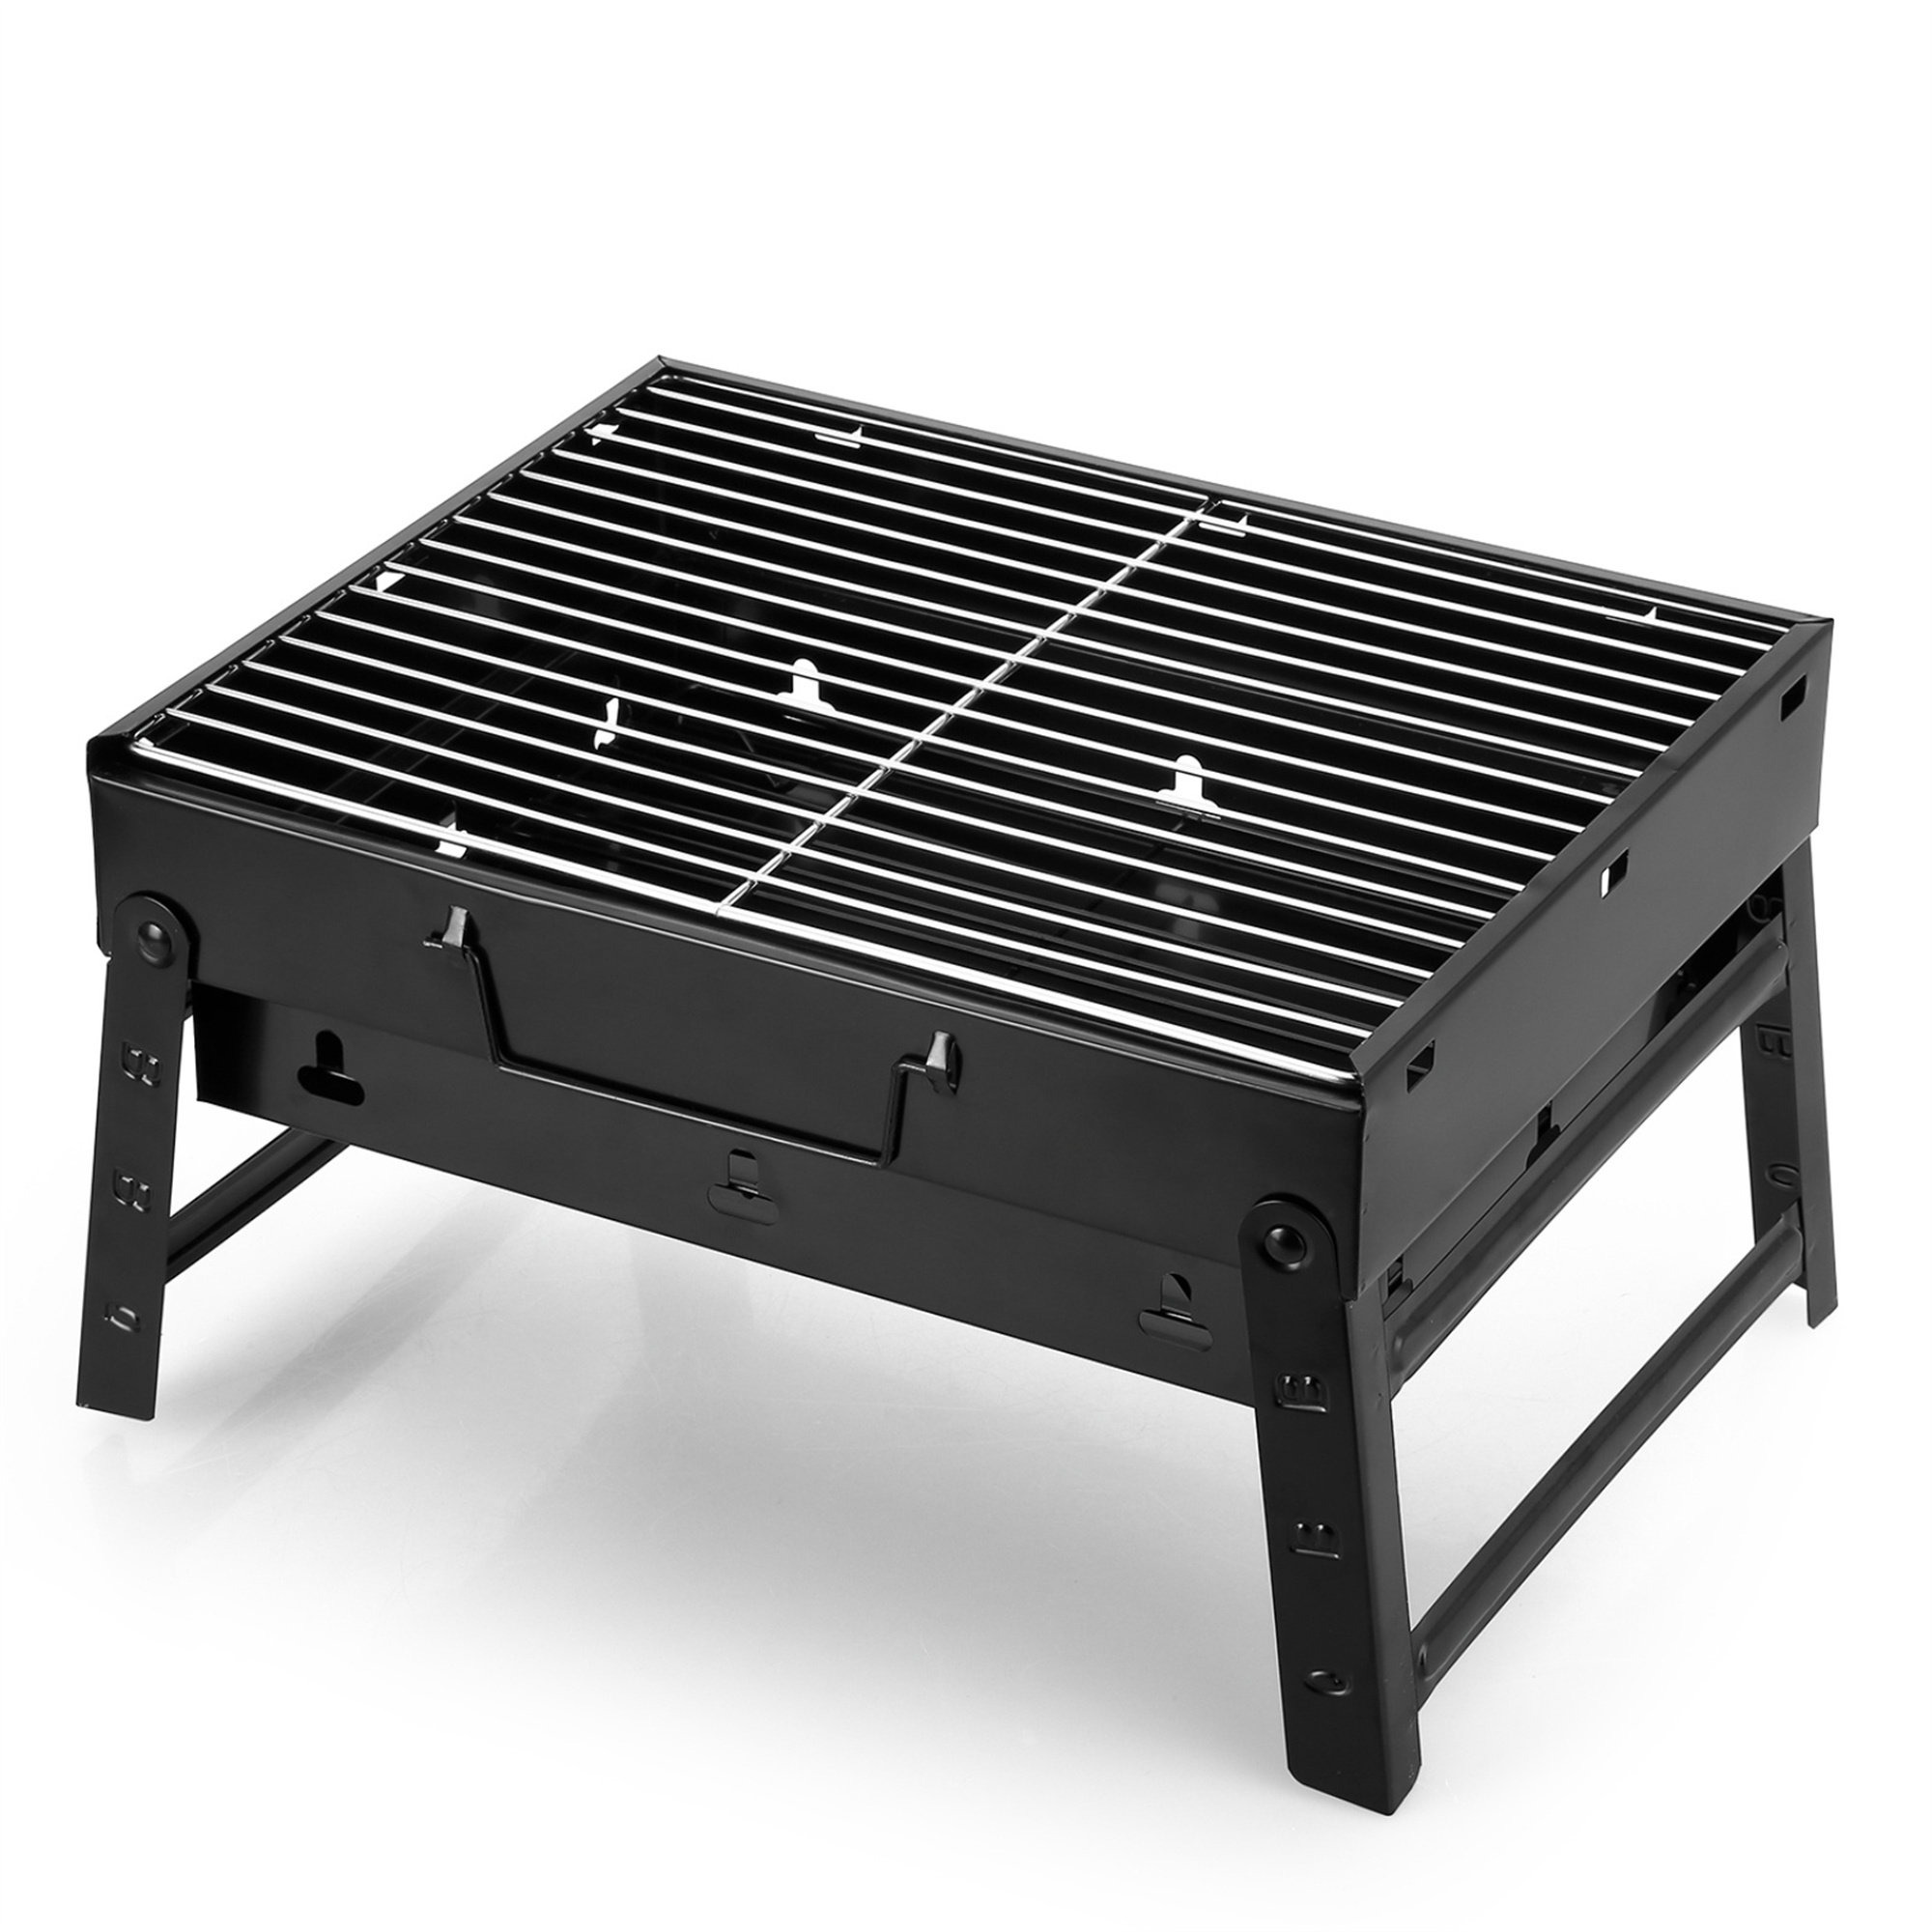 BBQ Croc Easy Portable Charcoal Grill, Folds to 1.5 & Reviews